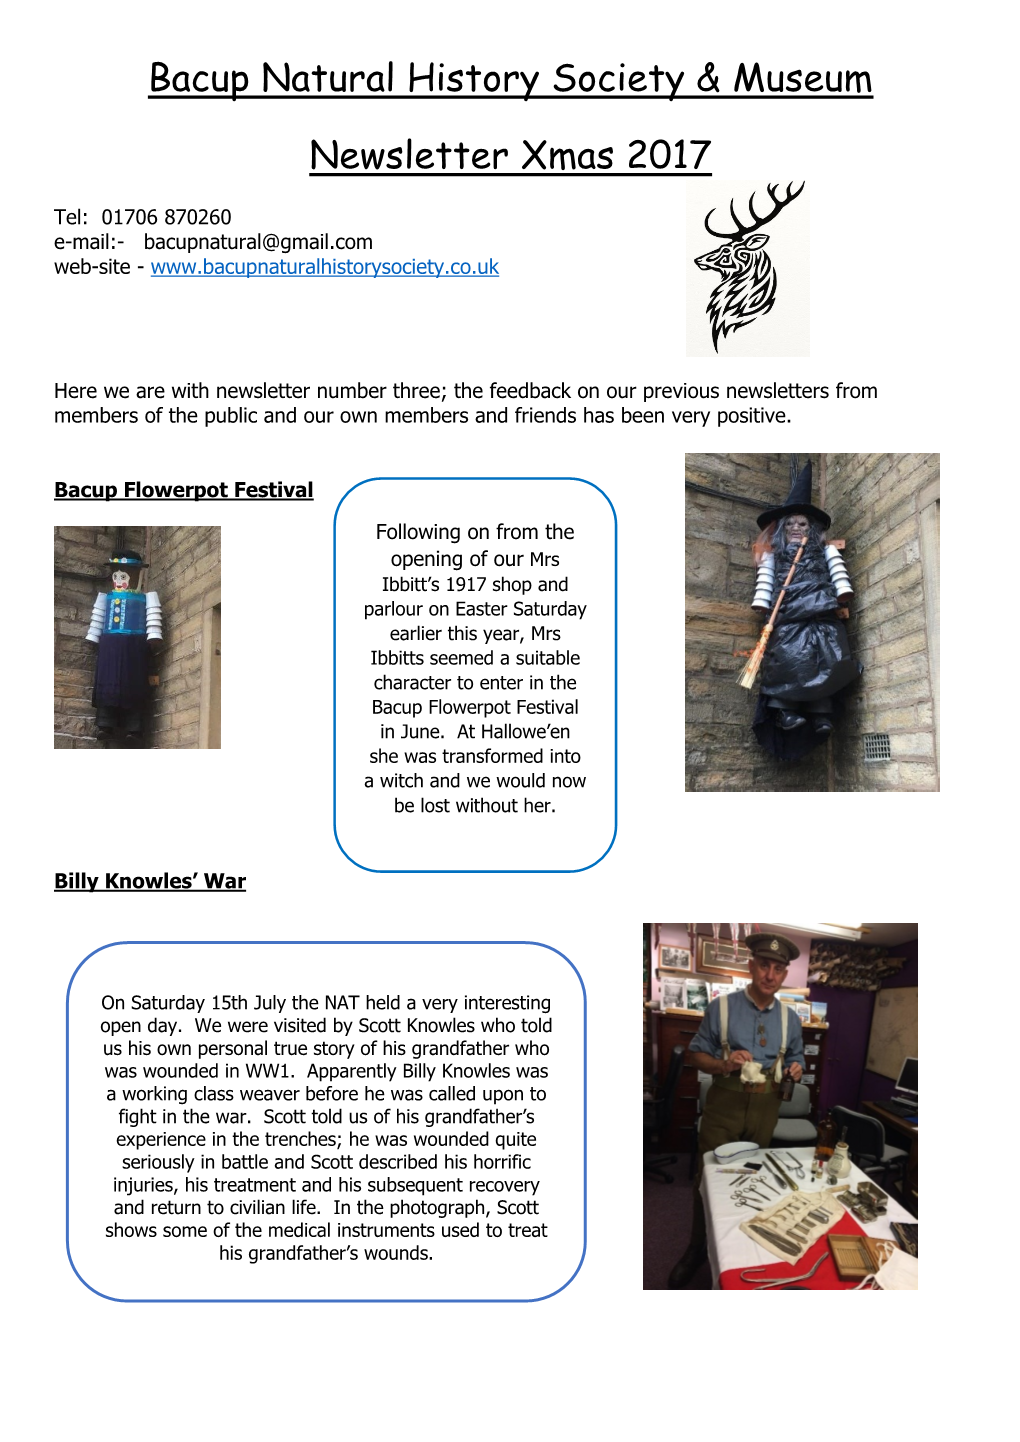 Bacup Natural History Society & Museum Newsletter Xmas 2017